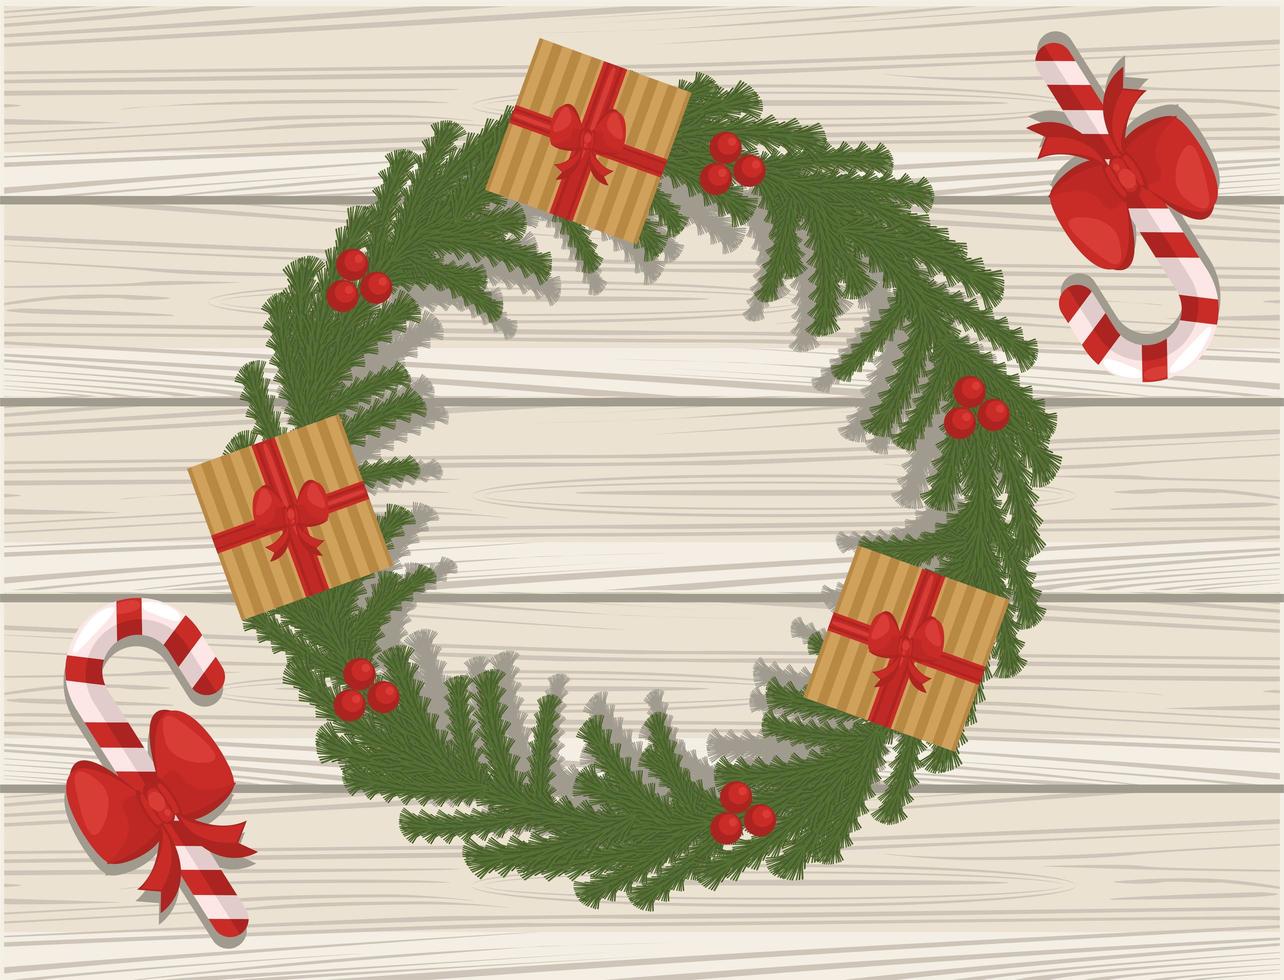 merry christmas card with gifts in garland on wooden background vector